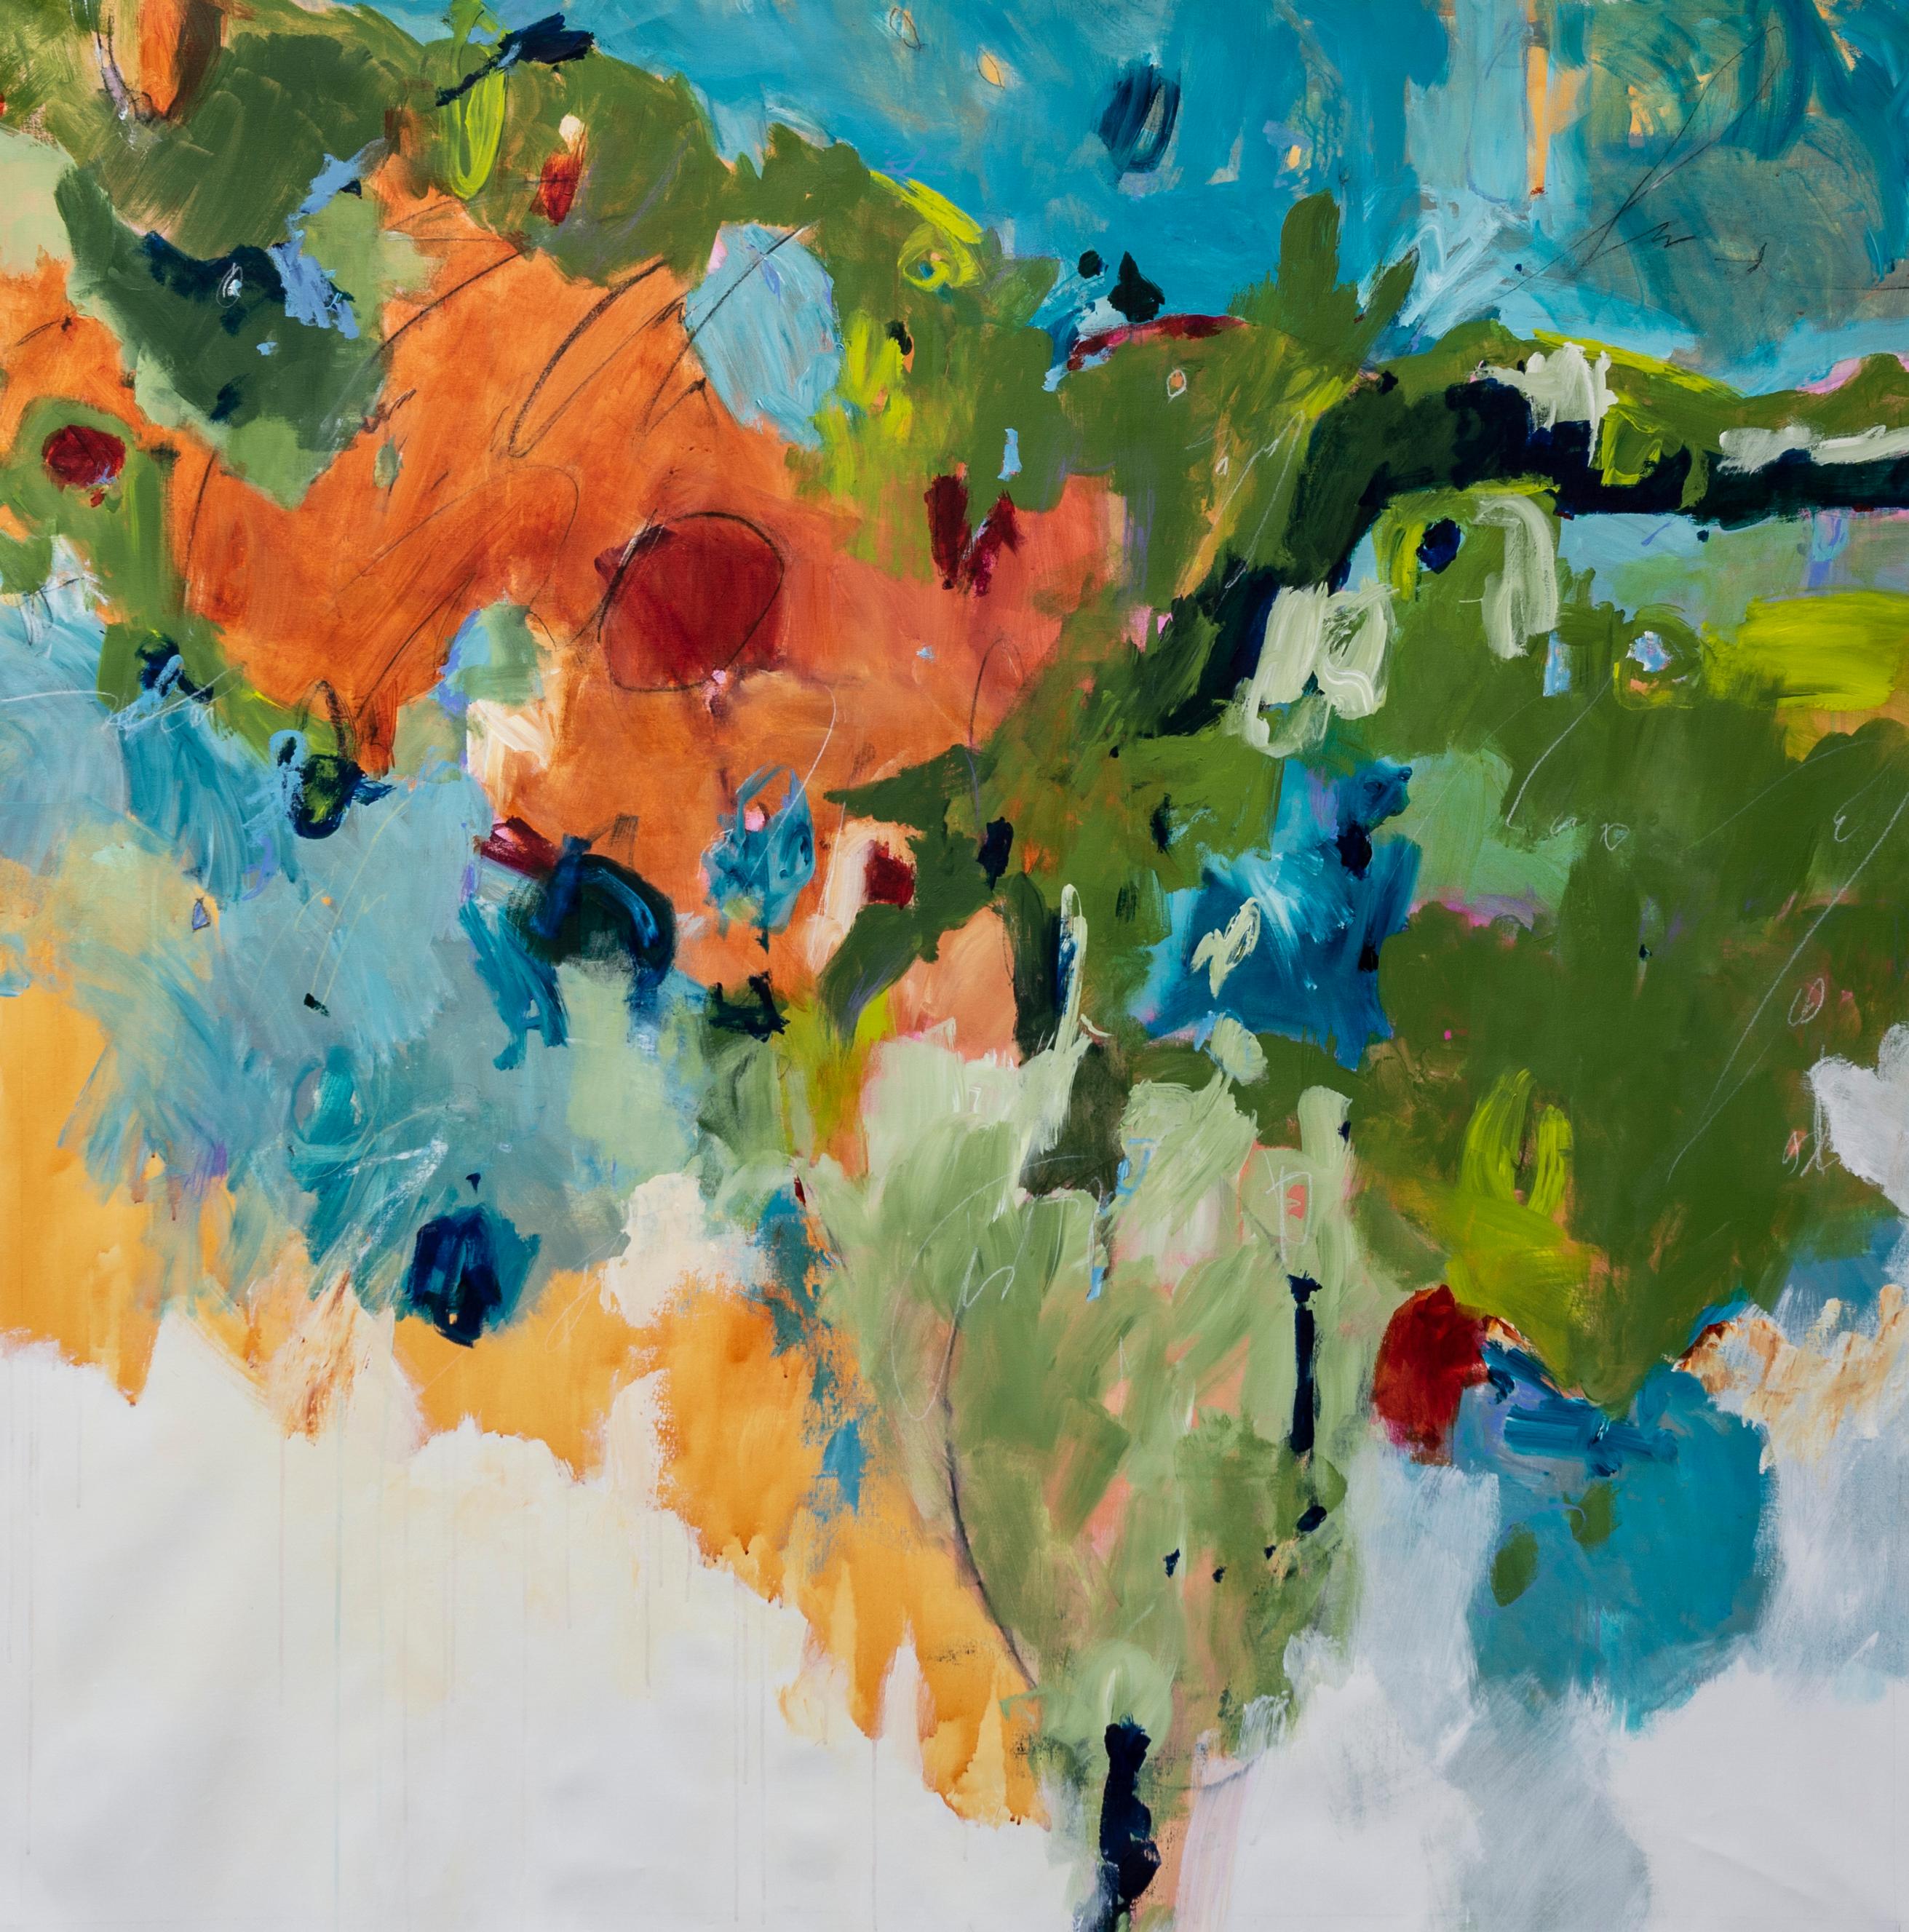 Jane Burton uses her mastery of colors to create powerful abstract & vibrant compositions. A bold combination of vibrant colors and expressive brushstrokes work together to create a unique abstract work of art. This is the perfect statement piece